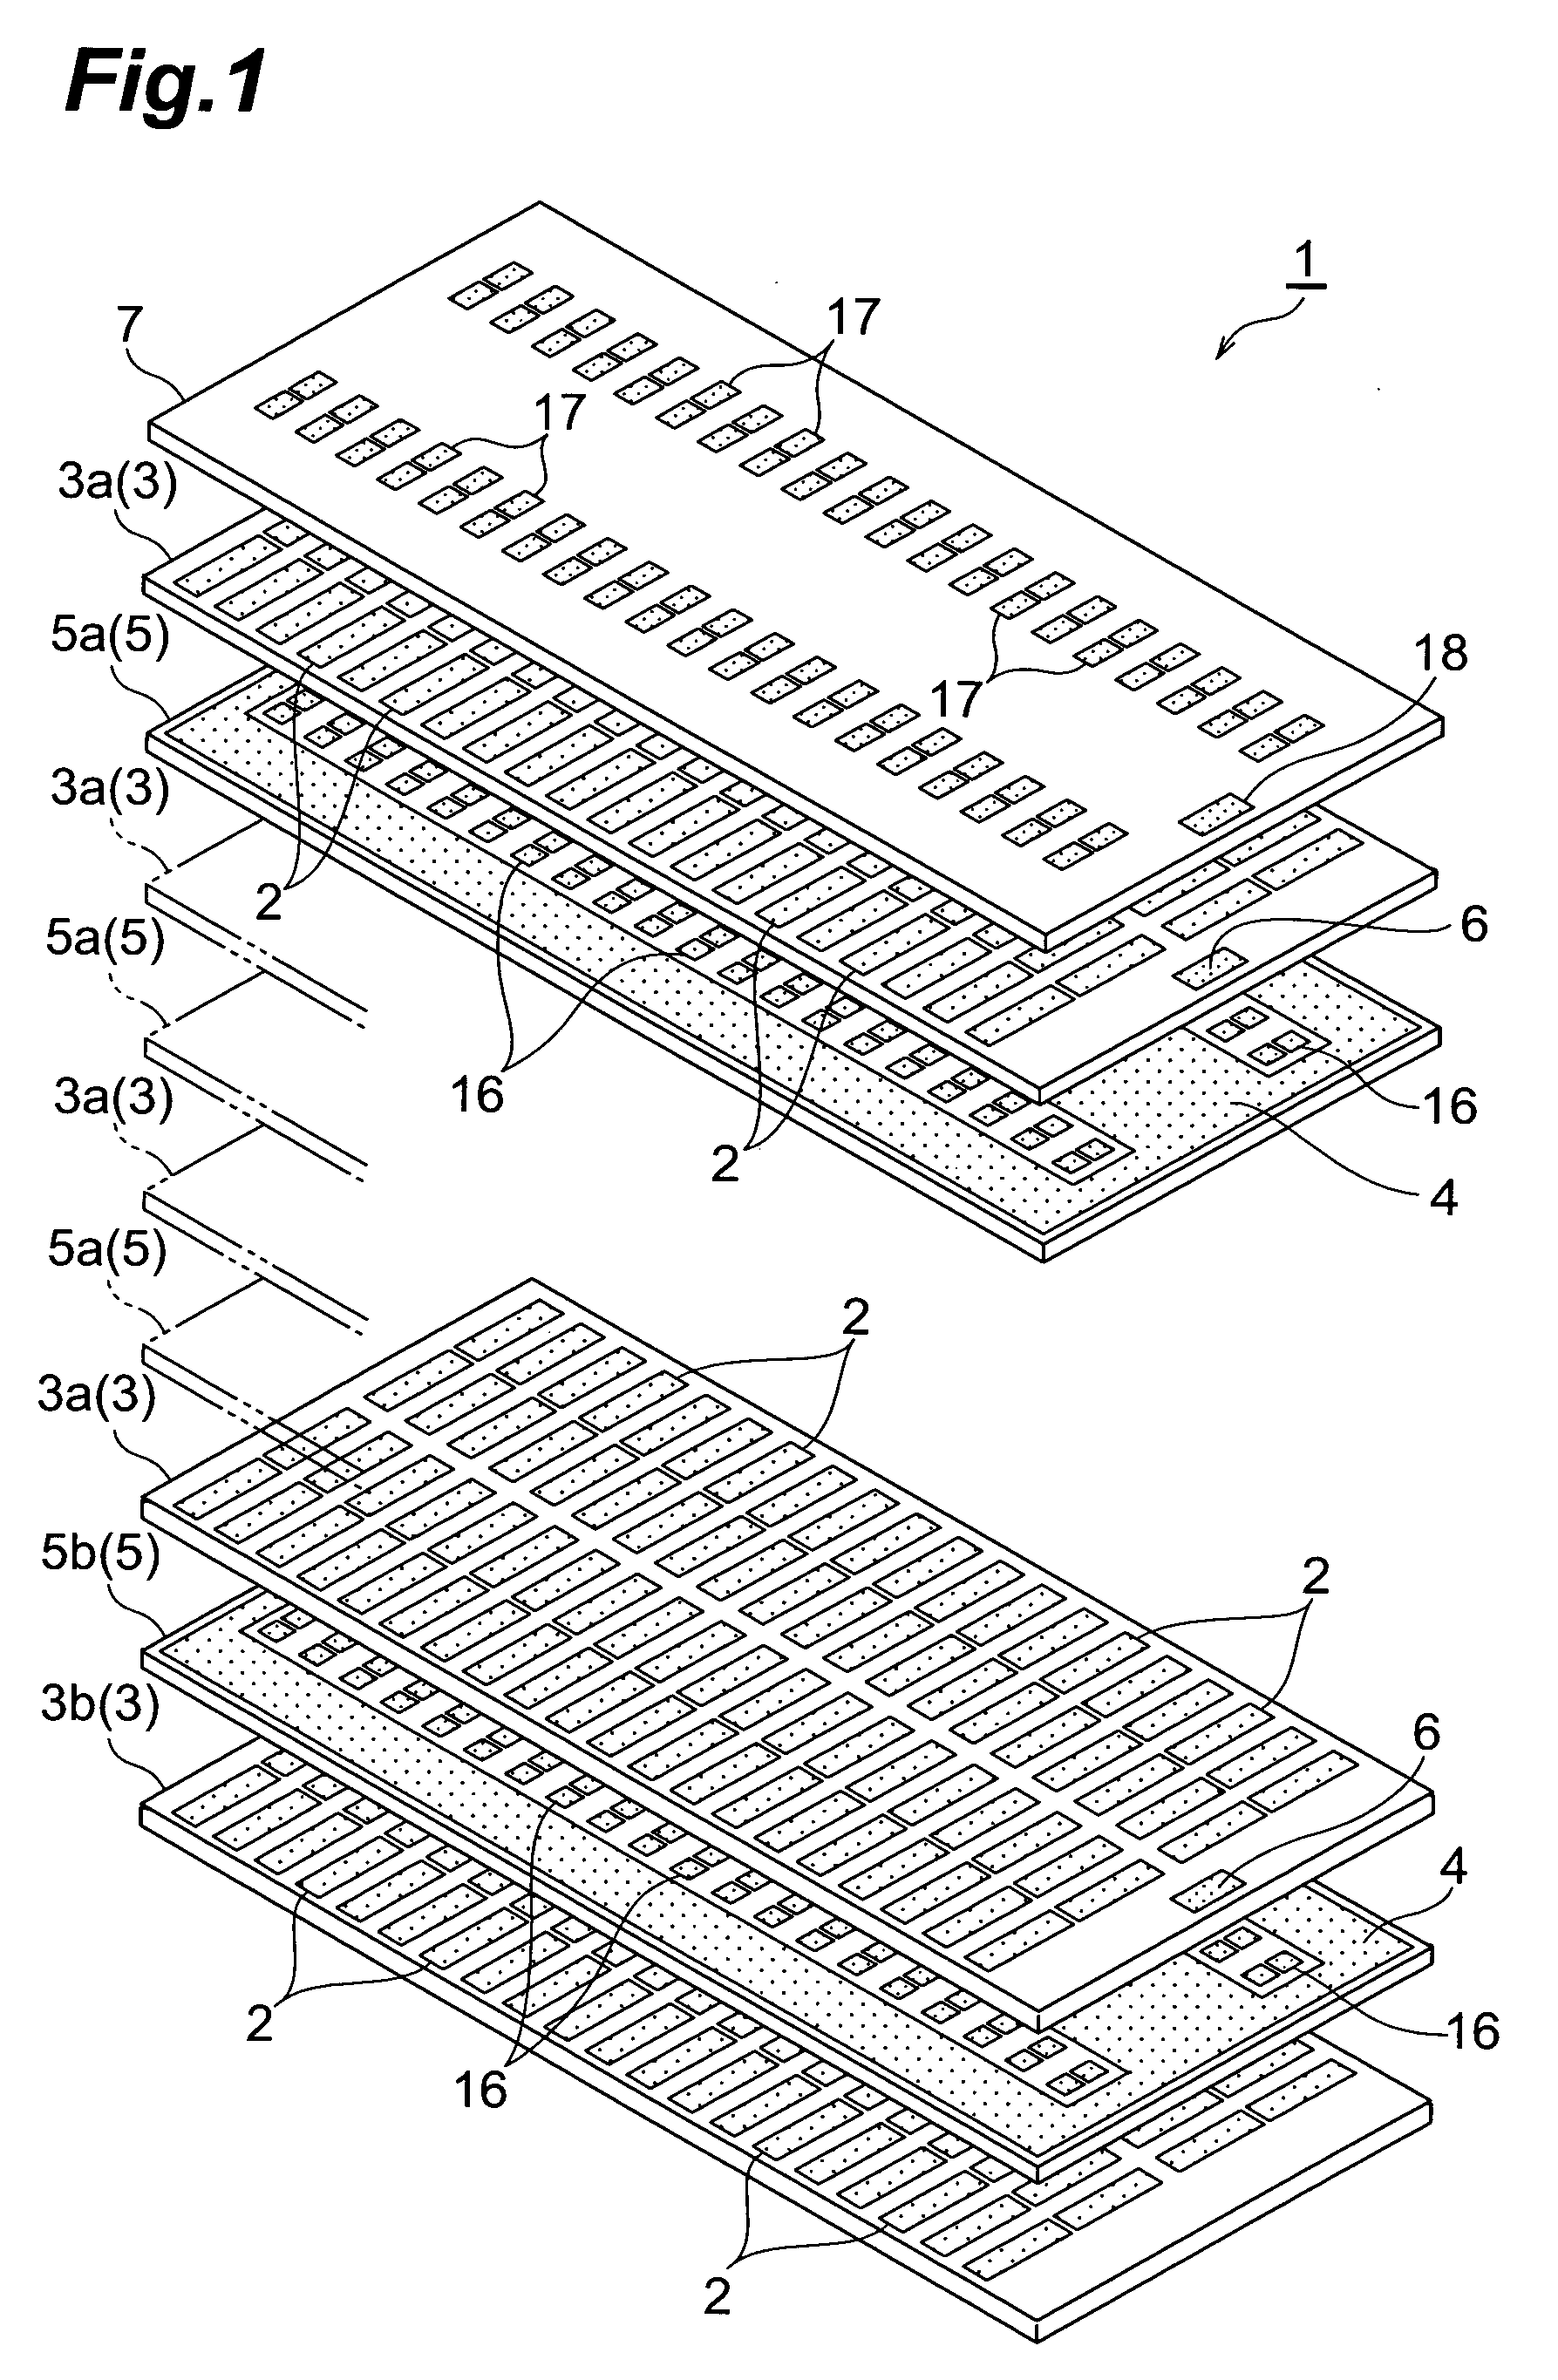 Multilayer ceramic device, method for manufacturing the same, and ceramic device